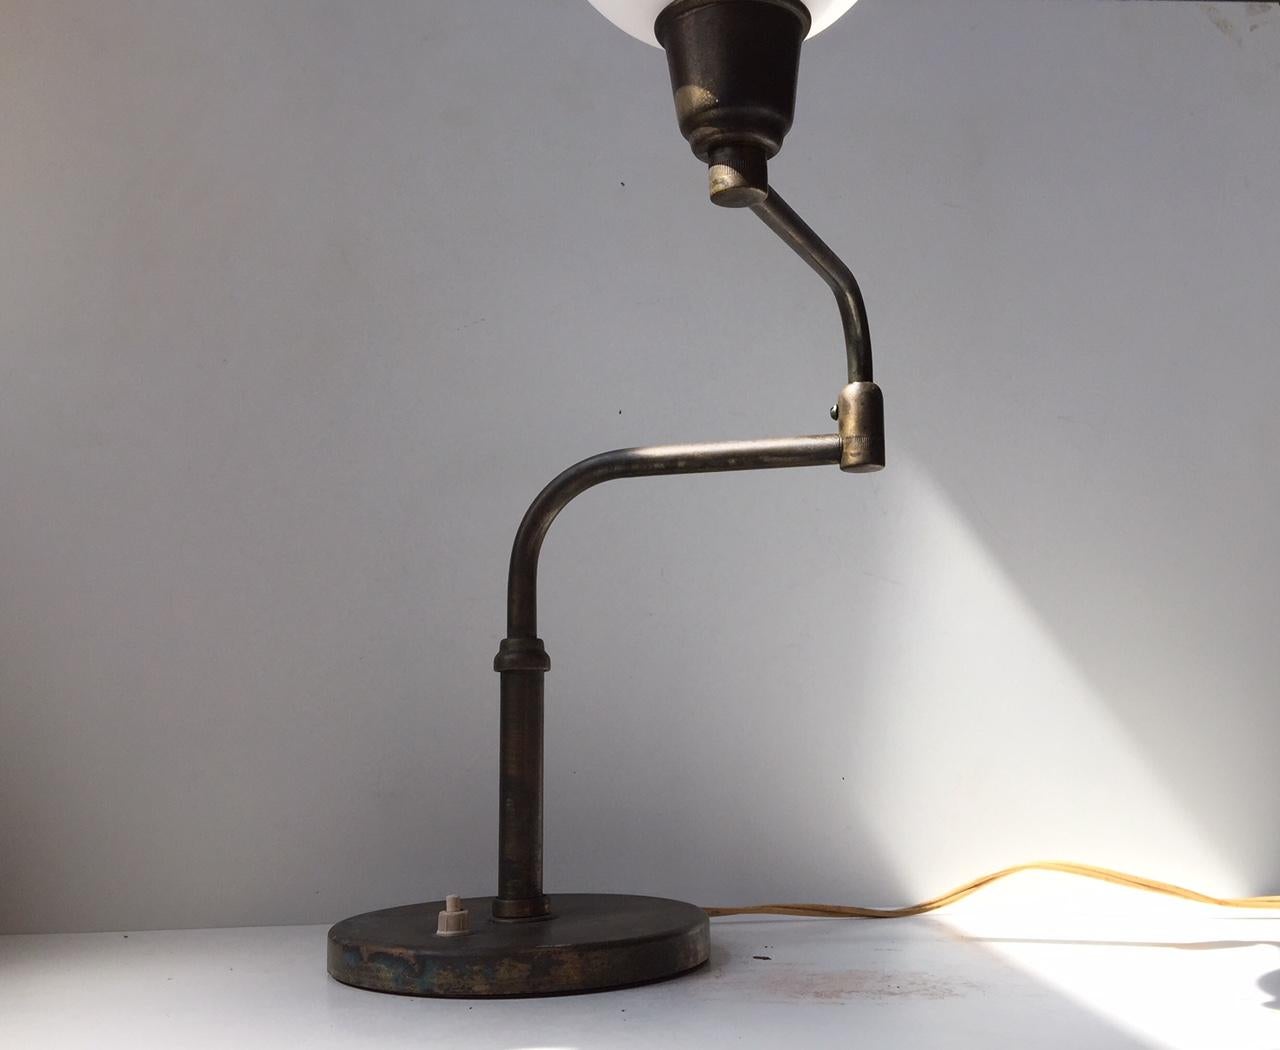 This table lamp is made of patinated solid brass with a spheric opaline glass shade. The piece features a swing arm mechanism as well as an on/off switch on the base. It was manufactured by Fog & Mørup during the 1930s. The style borderlines between